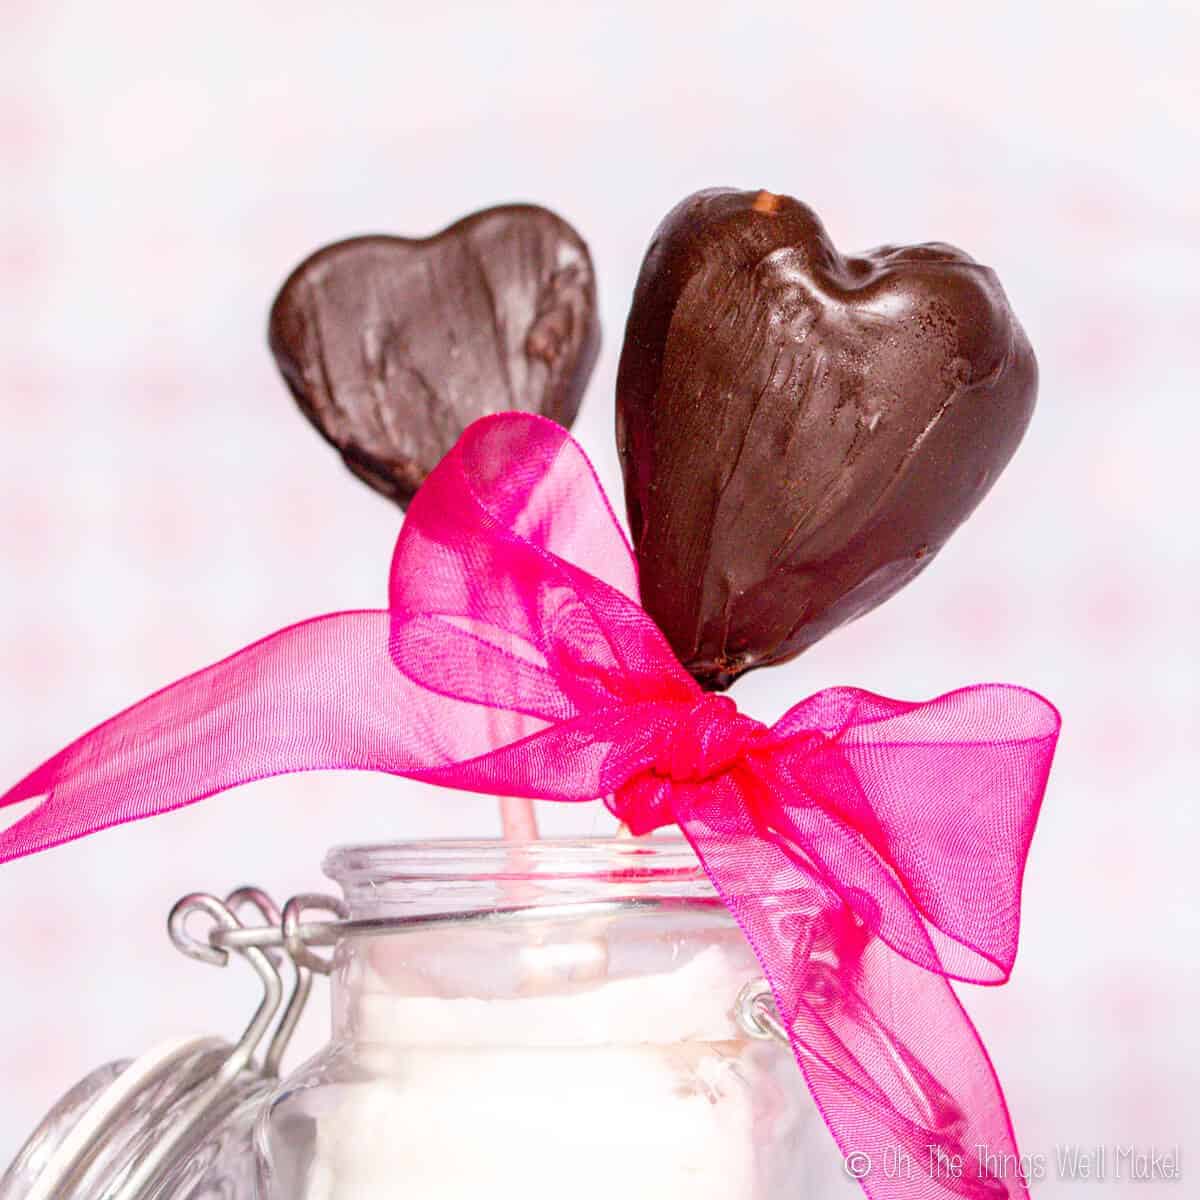 A chocolate-covered strawberry heart next to a chocolate-covered apple slice. The apple slice was first cut with a heart-shaped cookie cutter and then dipped in melted chocolate.  